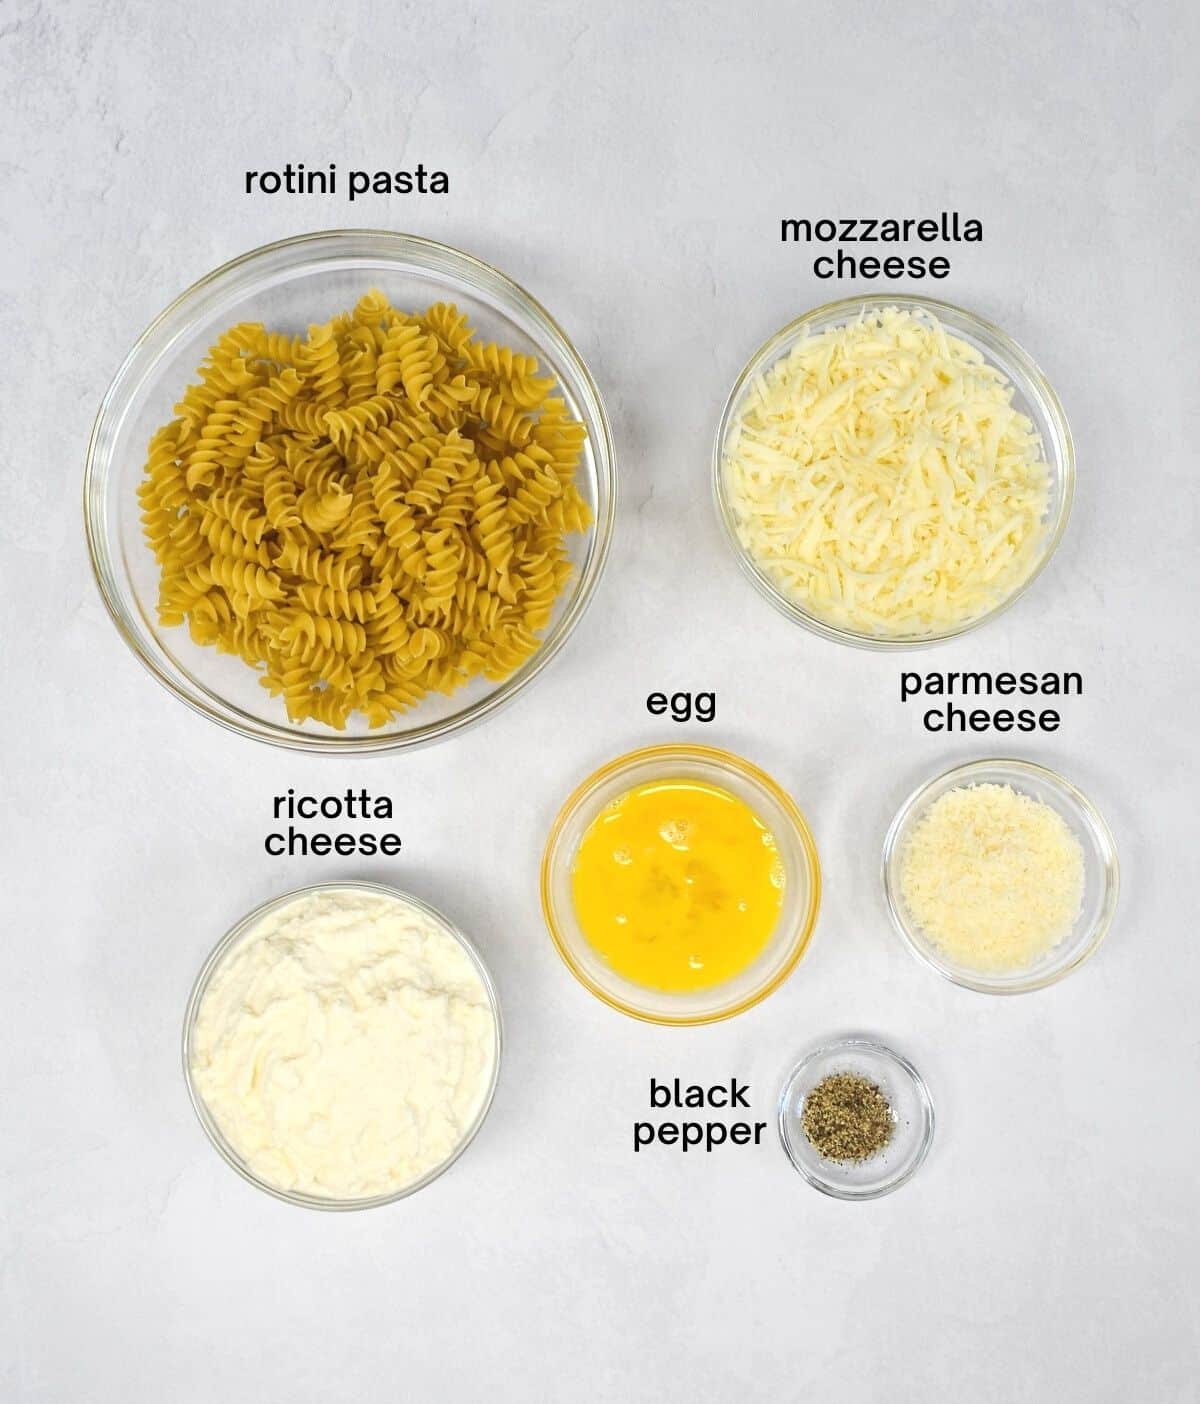 The ingredients for the cheese mixture and the pasta arranged on a white with each ingredient labeled in black letters.